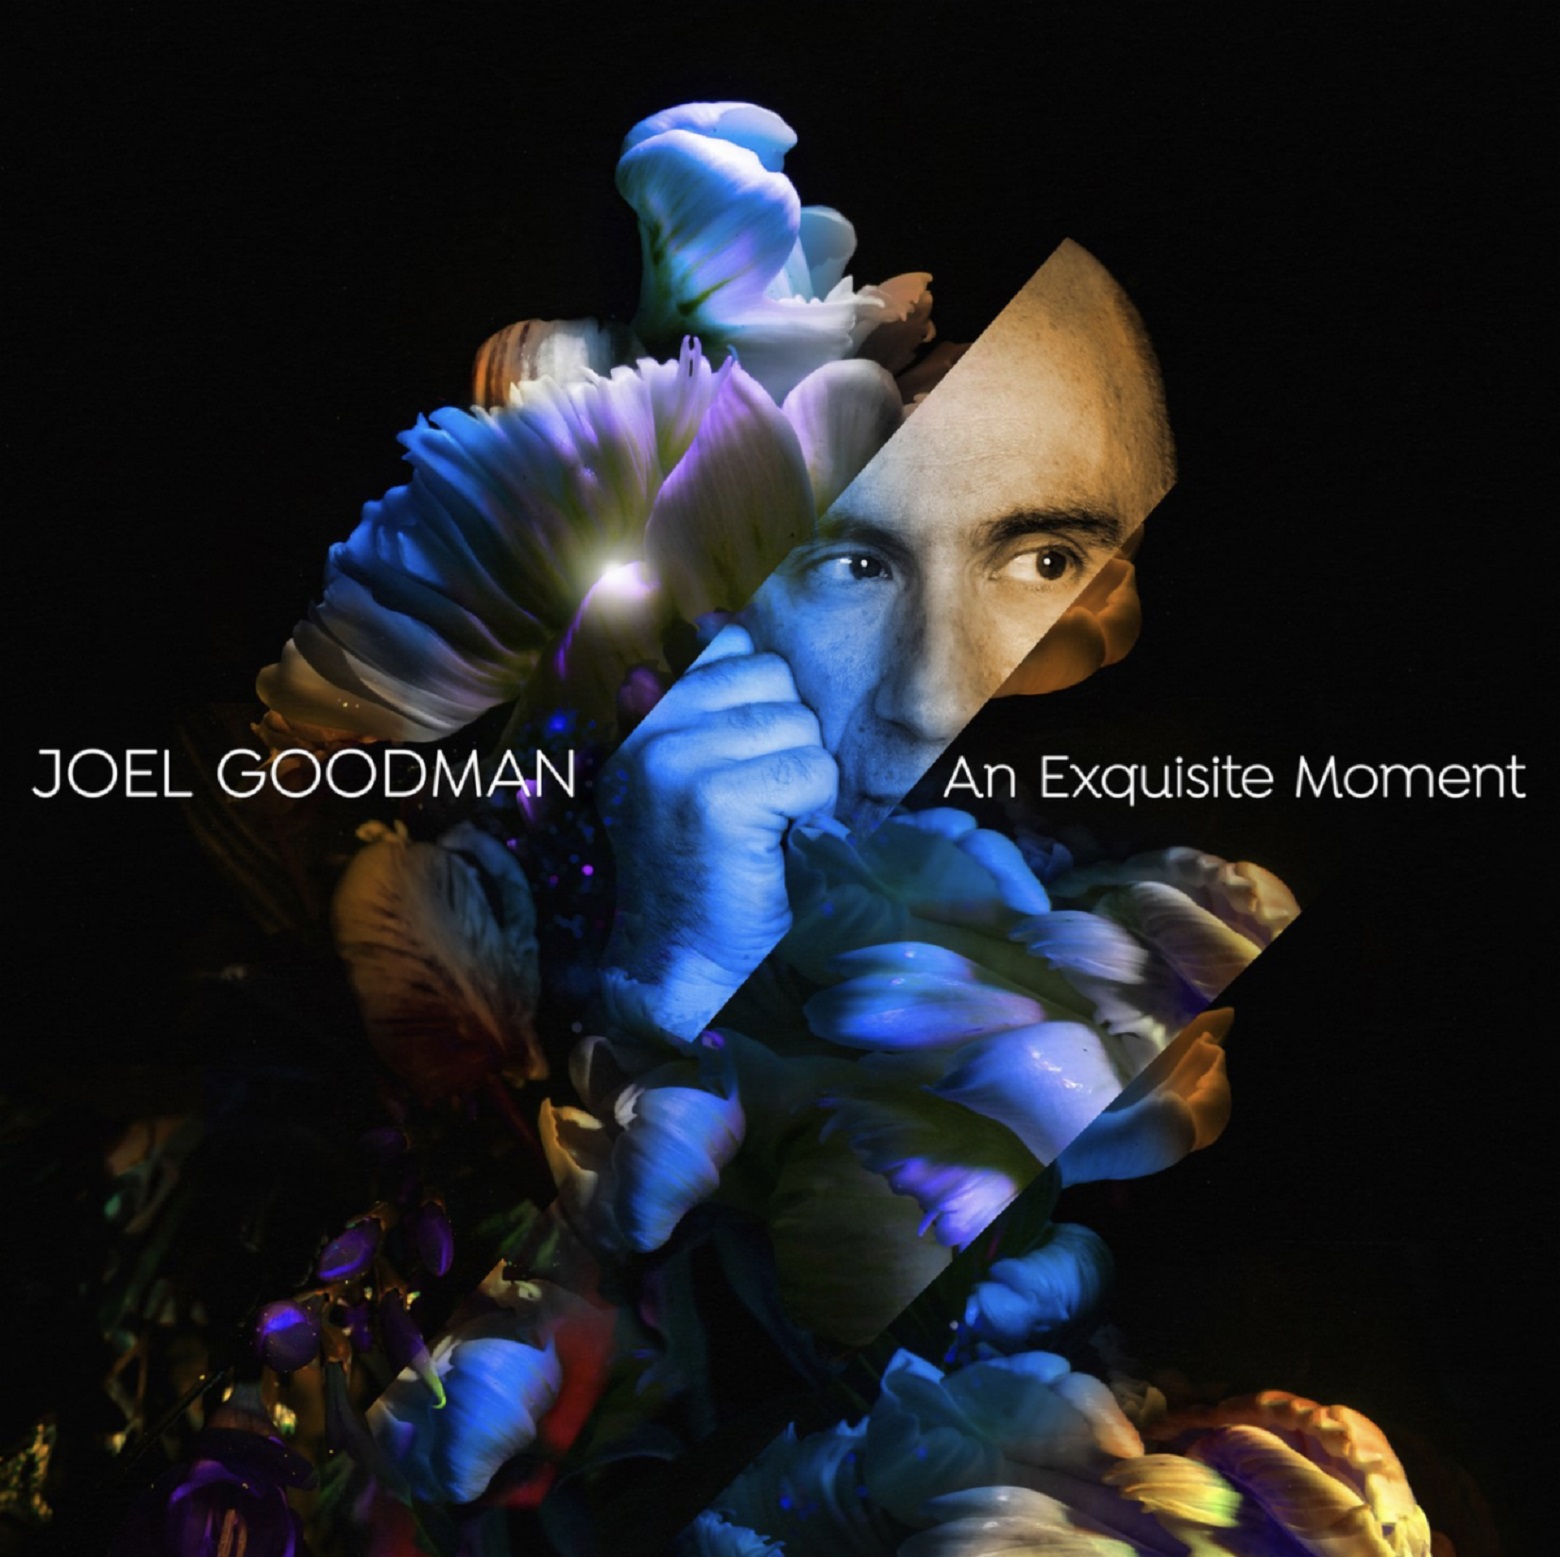 Composer/Multi-Instrumentalist Joel Goodman to release recording "An Exquisite Moment"